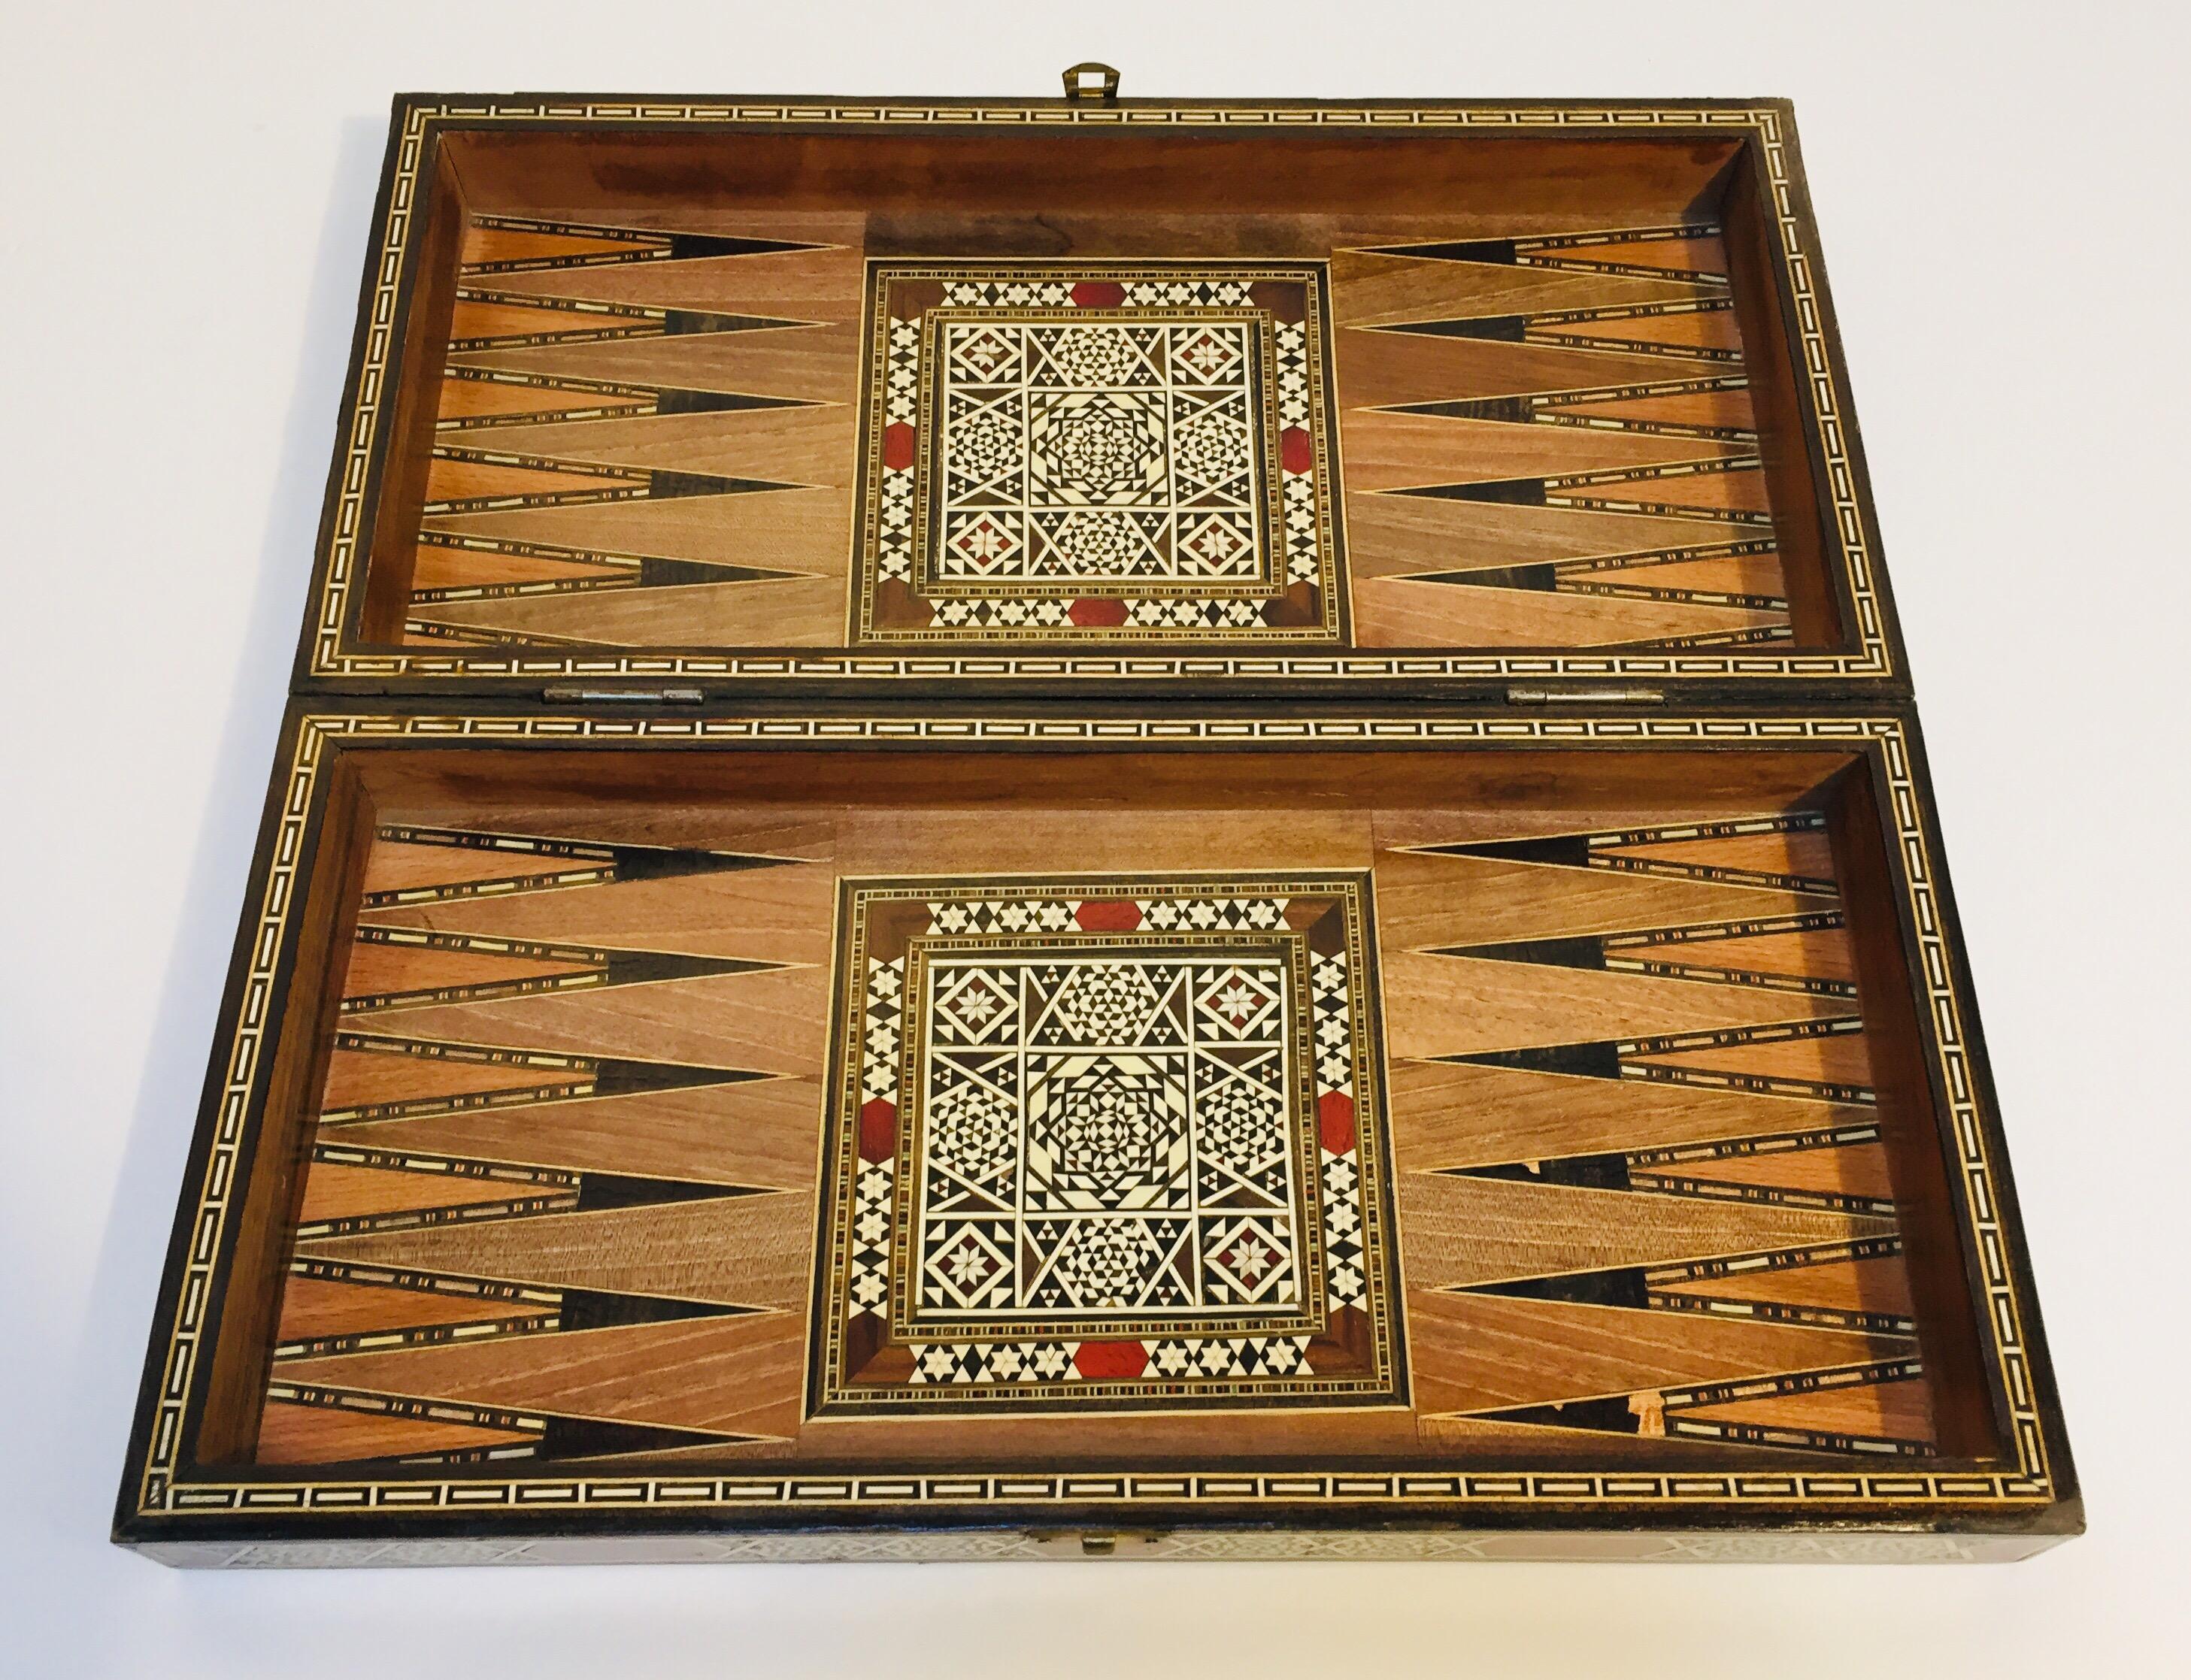 Large vintage midcentury Syrian inlaid mosaic backgammon and chess game.
Great inlaid micro mosaic hinged marquetry game box features a chess and checker board on the exterior and backgammon board on the interior with all the wooden dice and